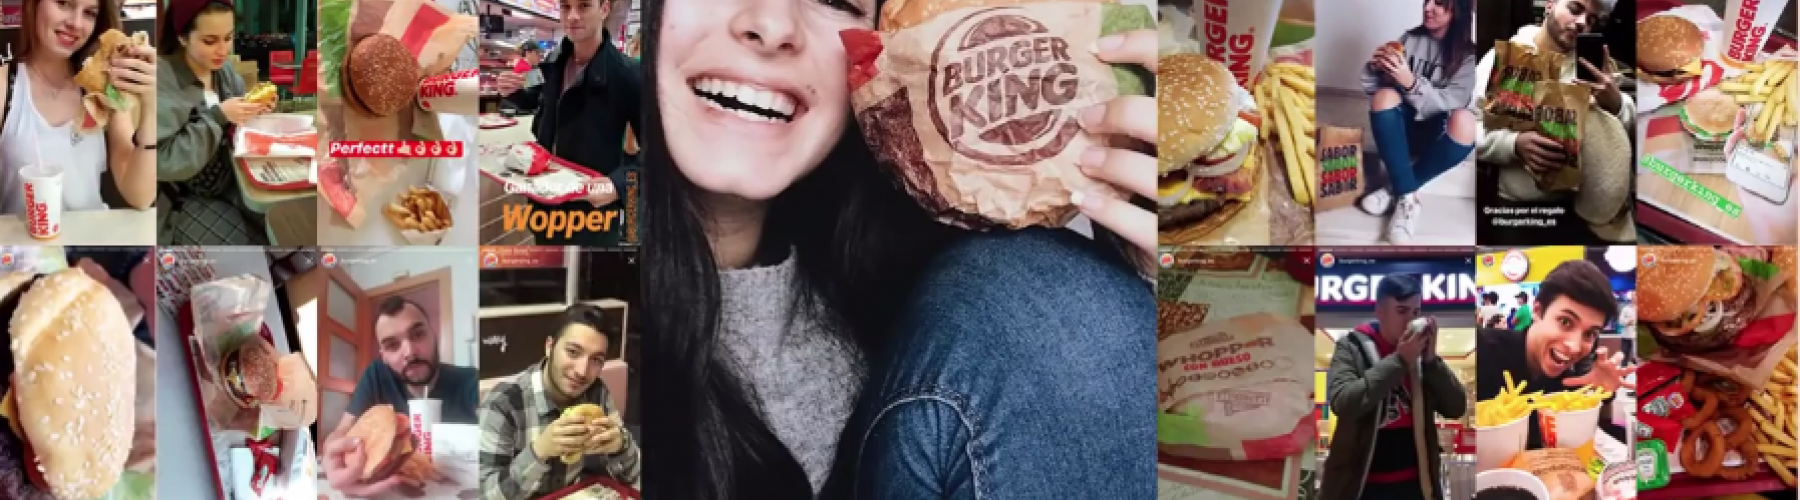 burger king order by stories